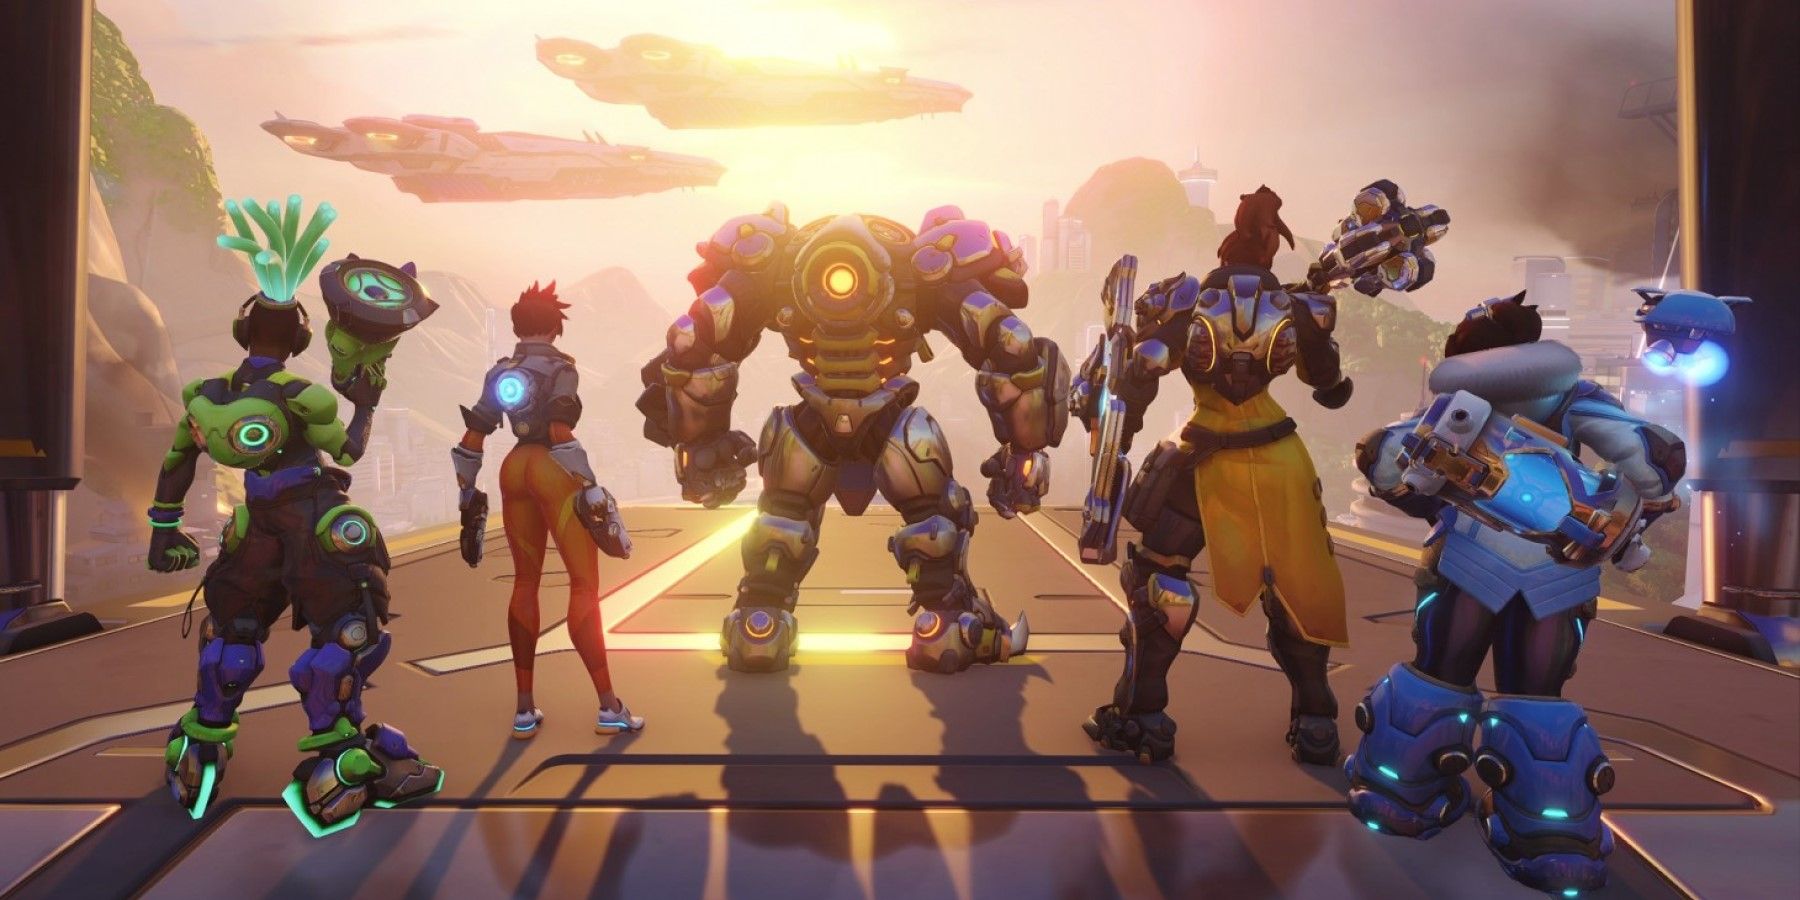 lucio tracer reinhardt brigitte and mei from the overwatch 2 pve trailer